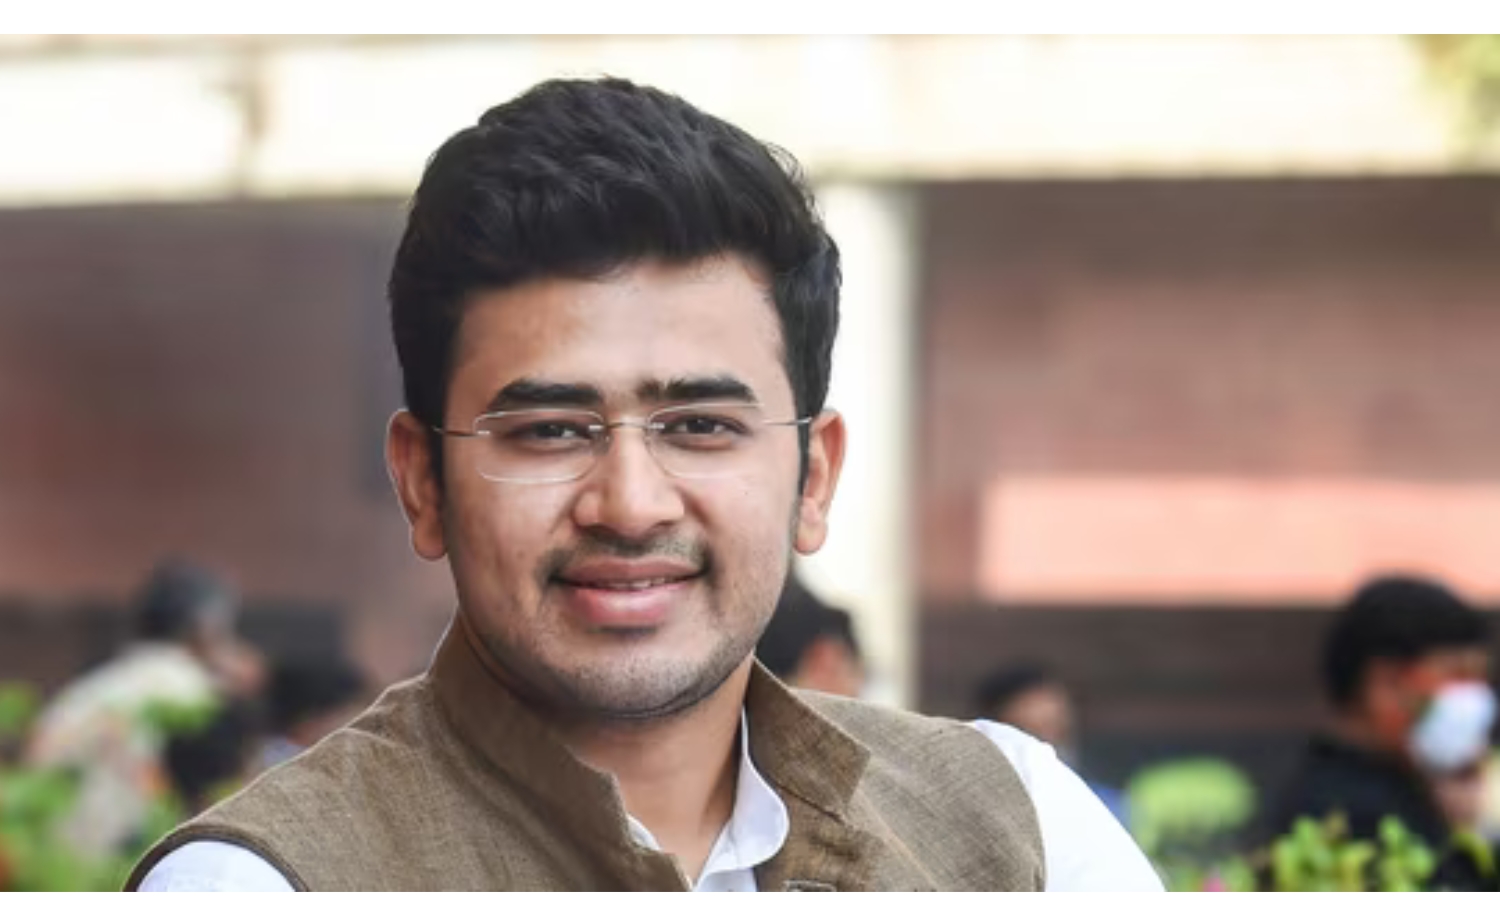 BJP's Tejasvi Surya's Assets Surge from 13.46 Lakh to 24.1 Crore in 5 Years: Affidavit Reveals Remarkable Growth